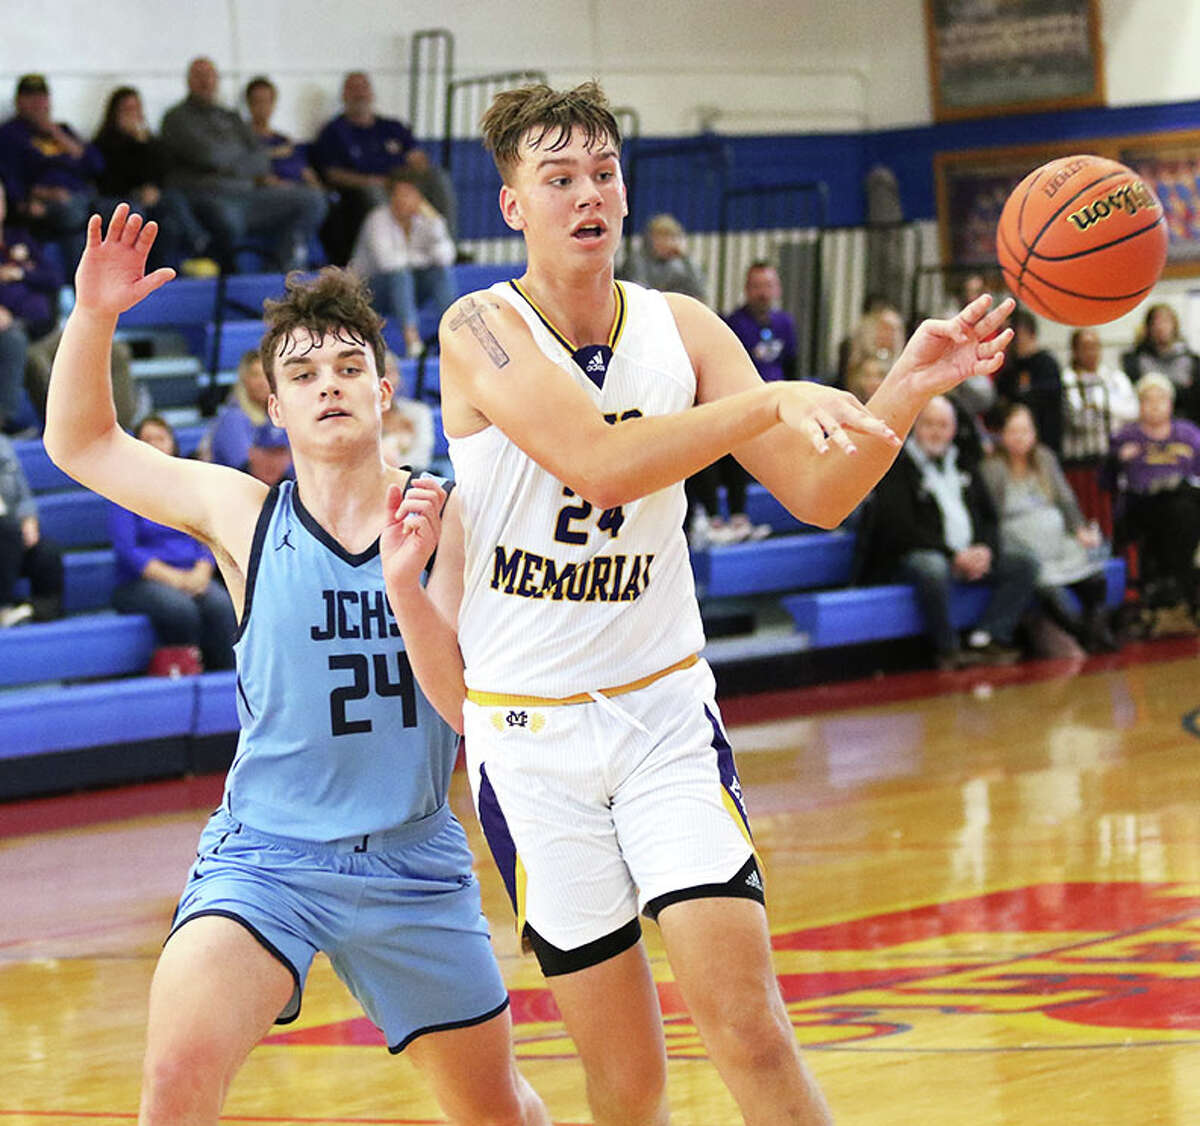 CM's Sam Buckley (right) passes to a teammate on a give-and-go while being defended by Jersey's Ayden Kanallakan in the Hoopsgiving Classic on Friday at Milazzo Gym in Roxana.